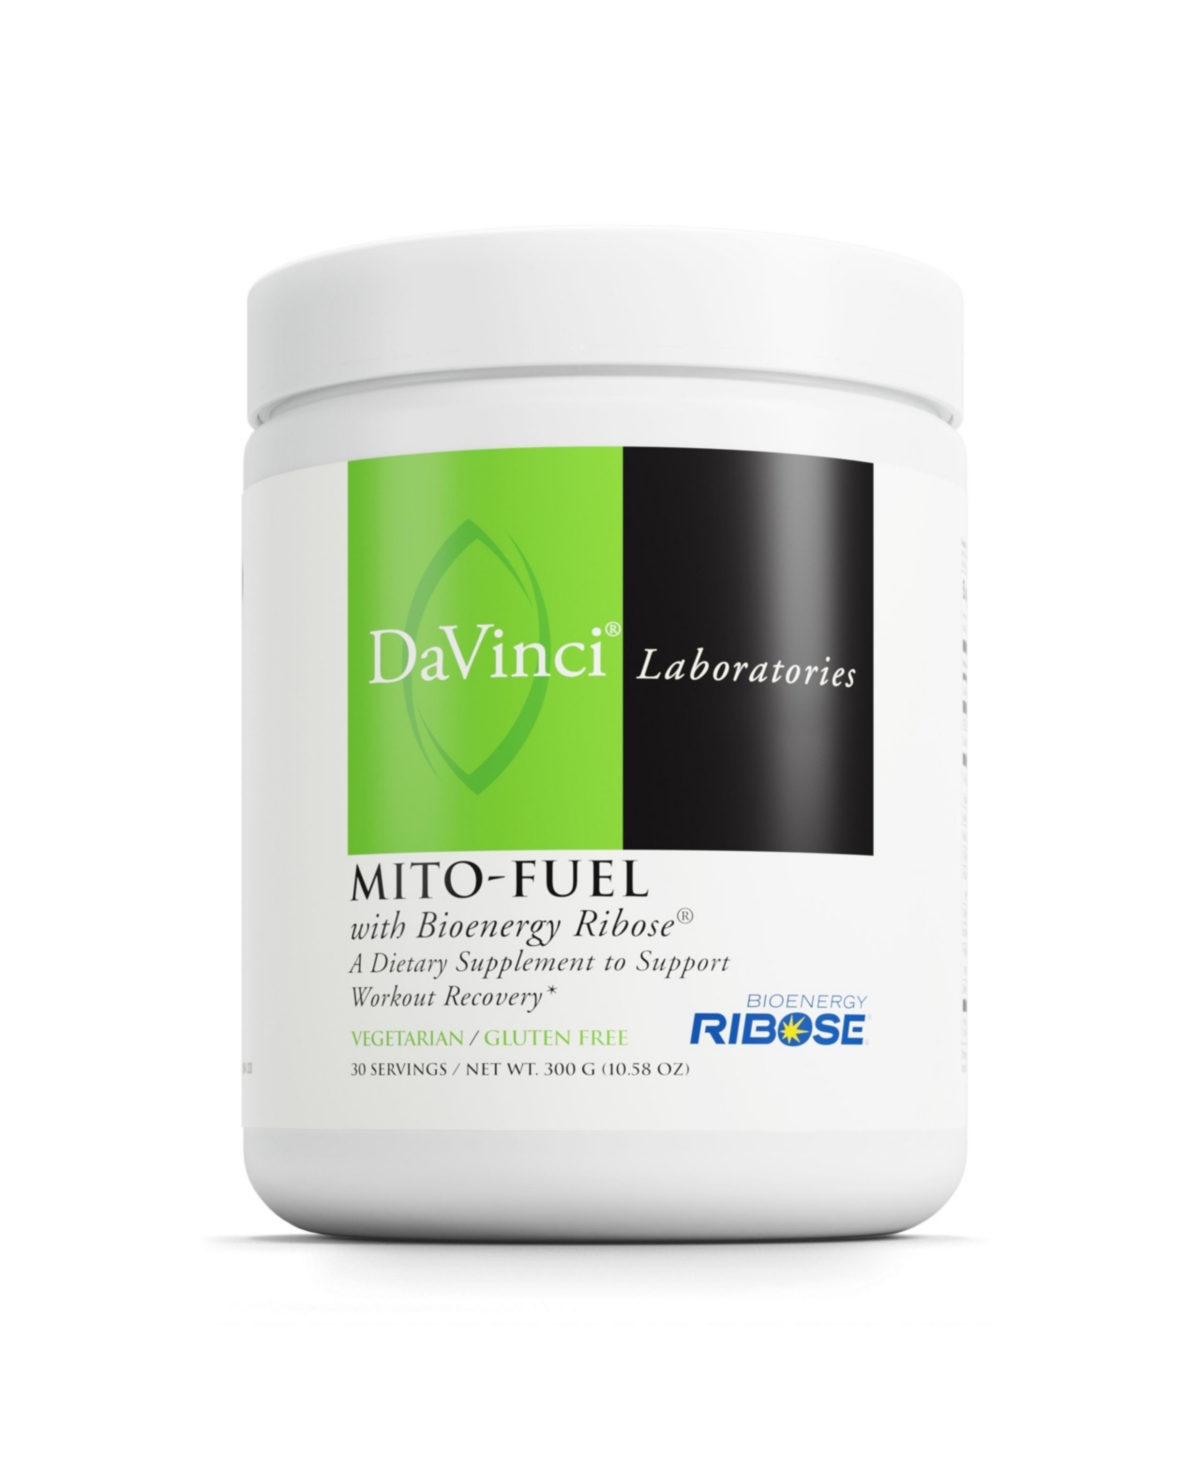 DaVinci Labs Mito-Fuel - Drink Mix Supplement to Support Workout and Muscle Recovery, Heart Health and Blood Circulation - With C